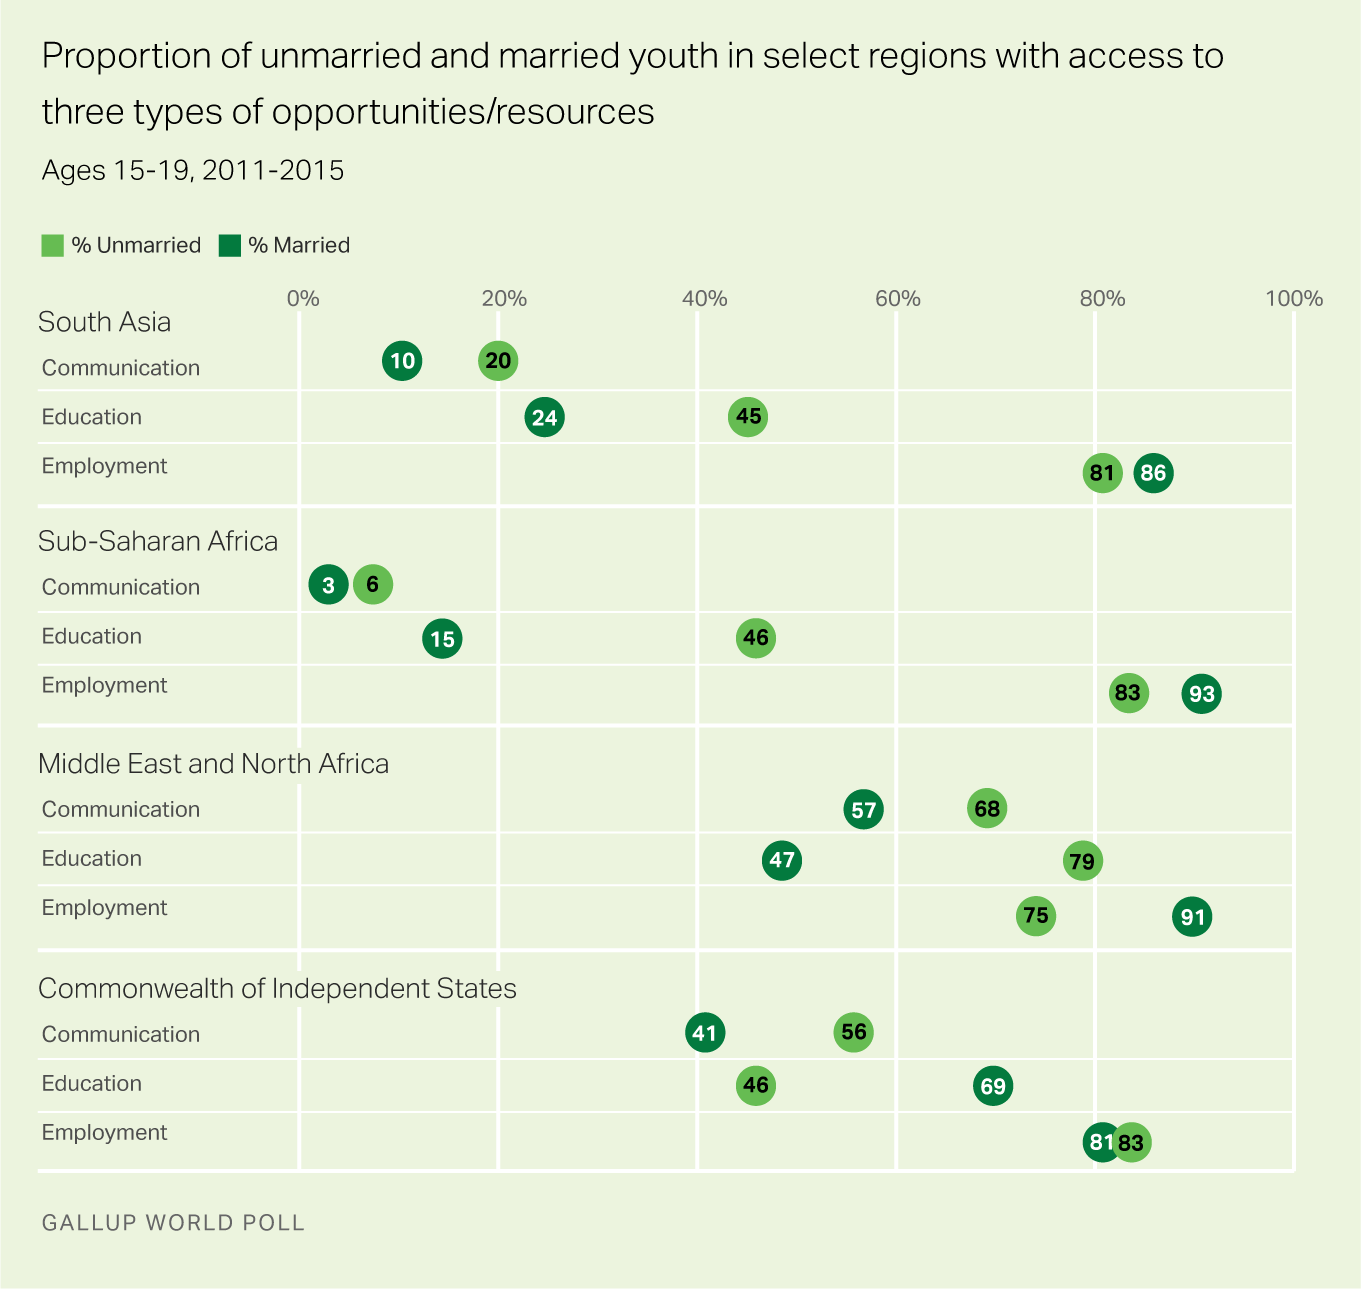 Proportion of unmarried and married youth in select regions with access to three types of opportunities/resources